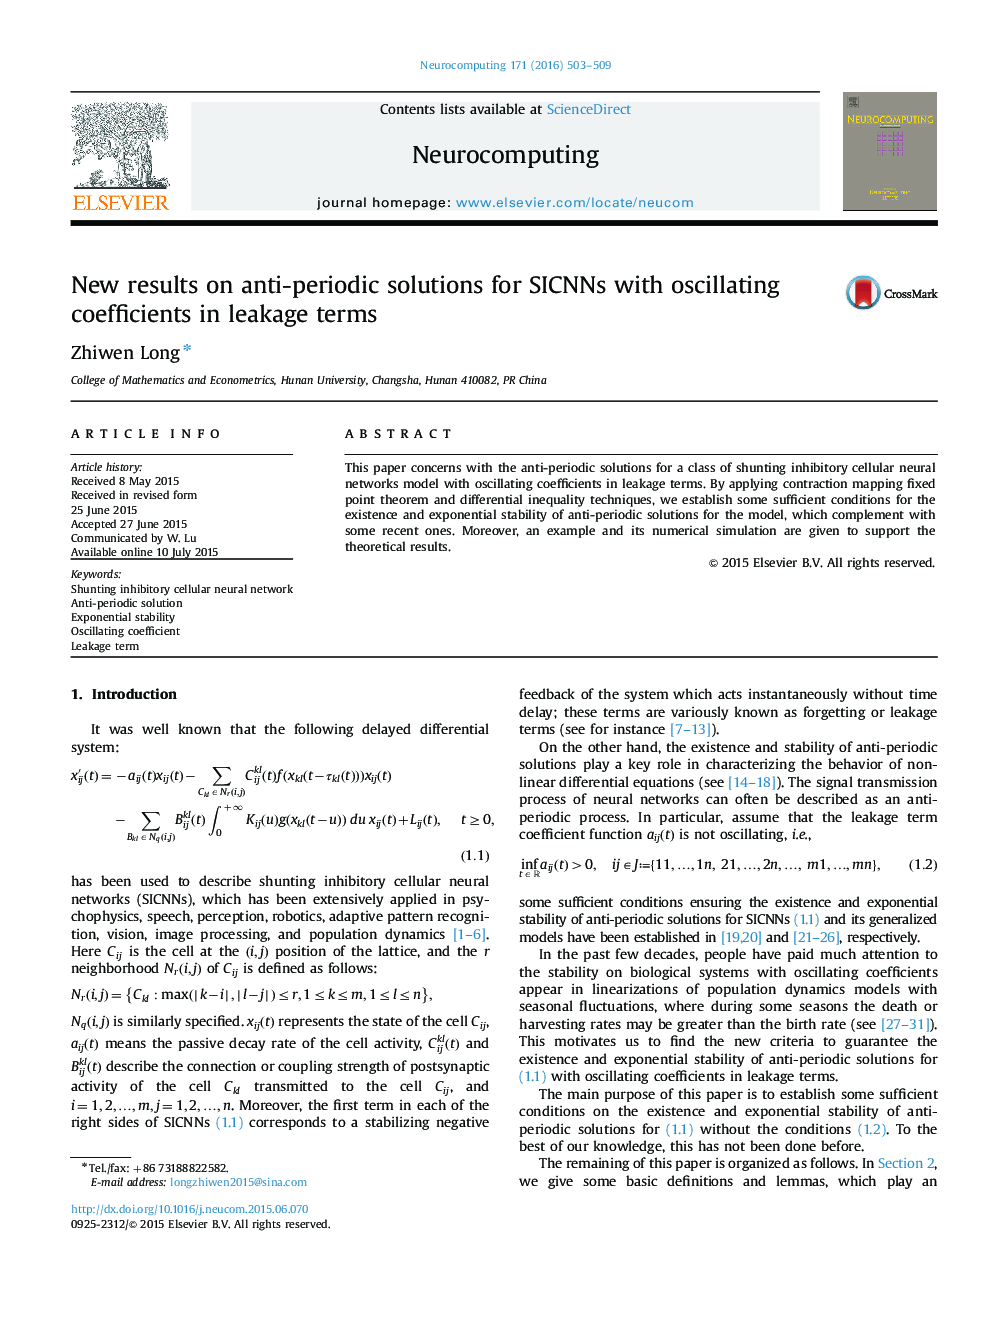 New results on anti-periodic solutions for SICNNs with oscillating coefficients in leakage terms